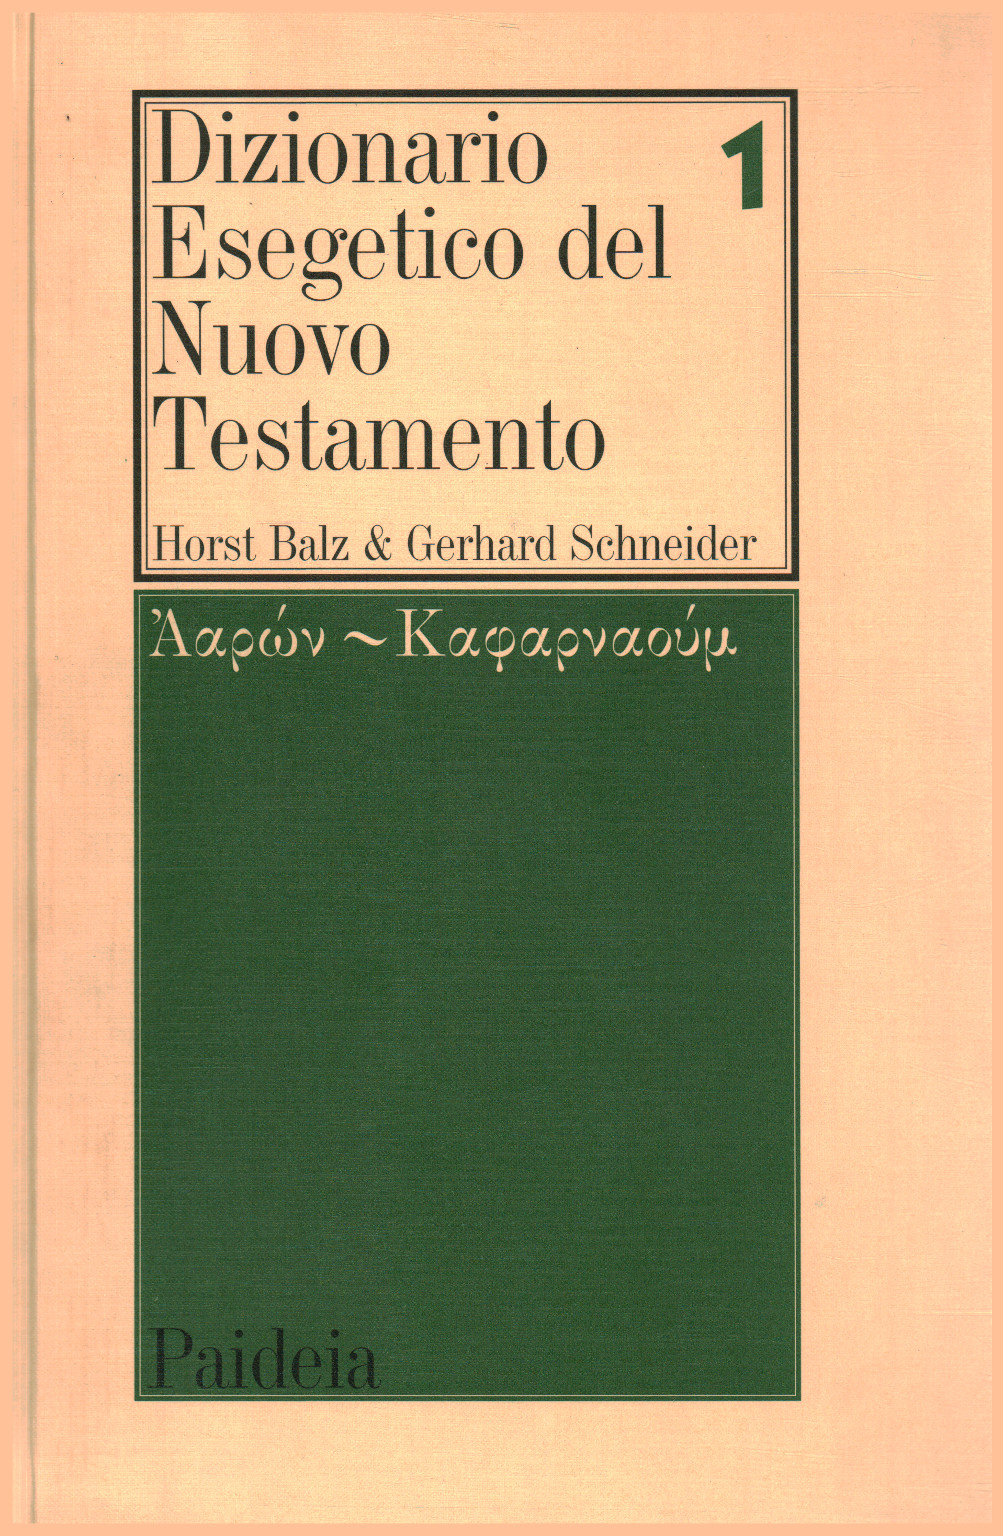 Dictionary Exegesis of the New Testament (vol. 1), s.a.